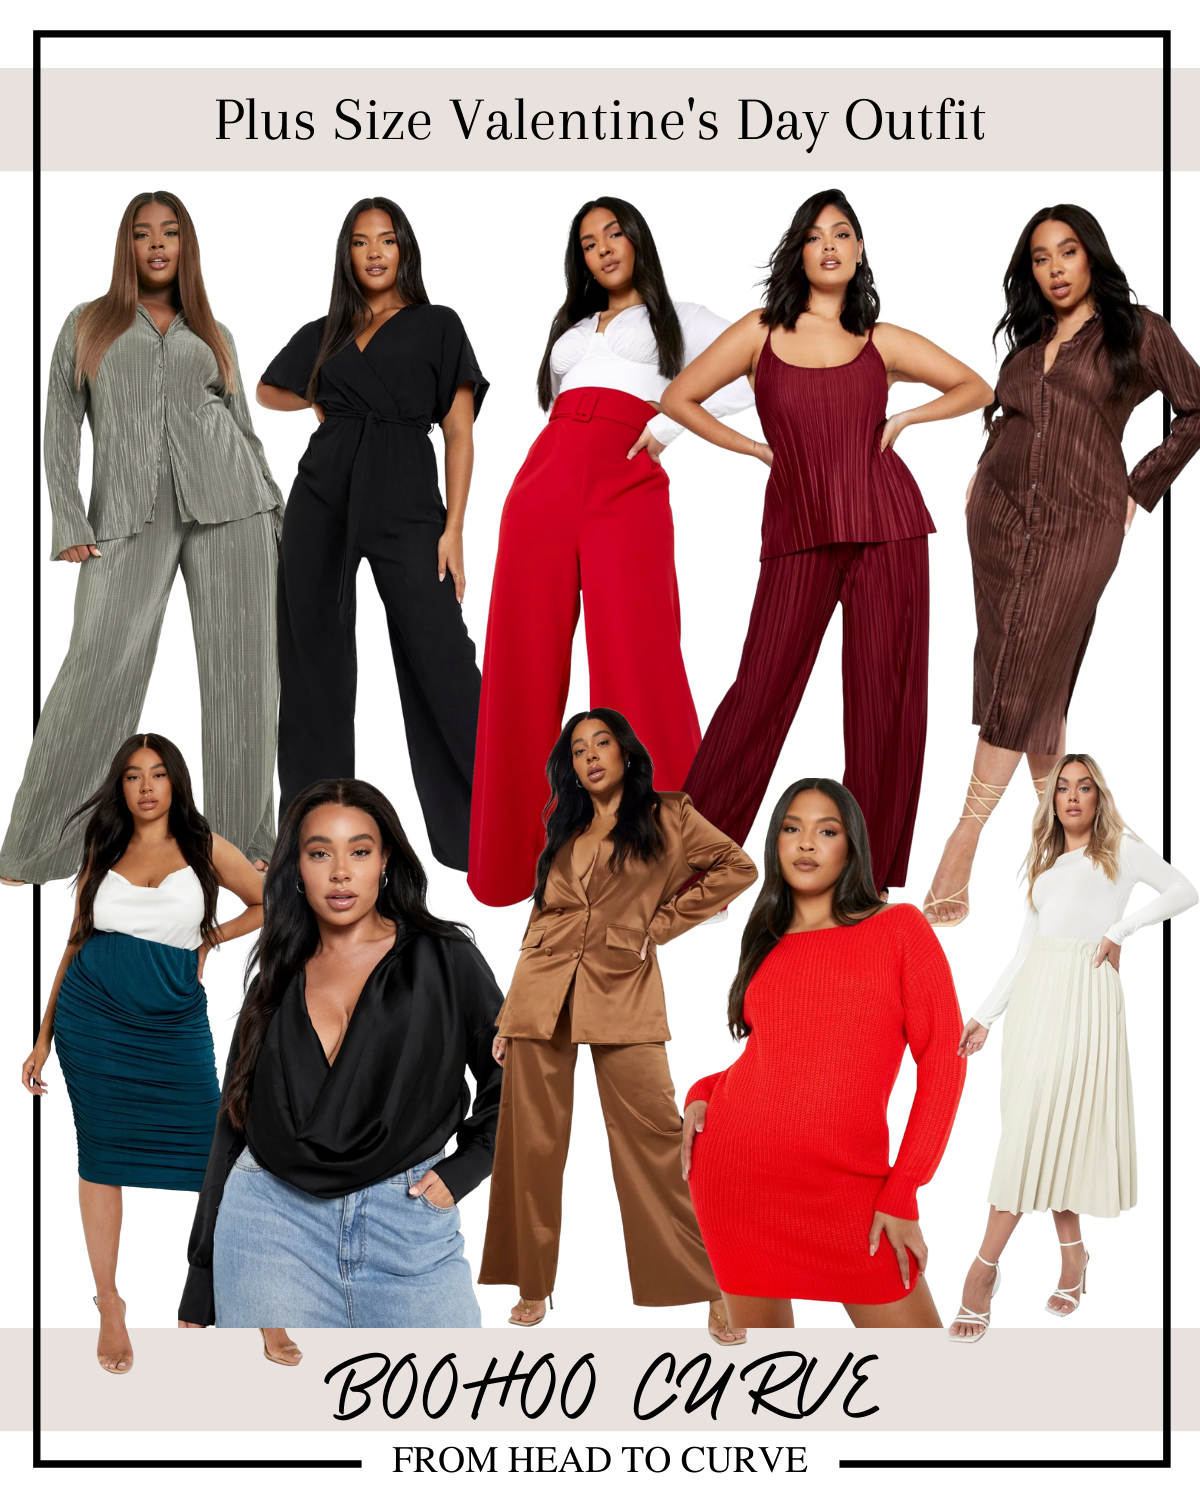 Affordable curvy Valentine's Day outfit. #curvyblogger #valentinesdayo